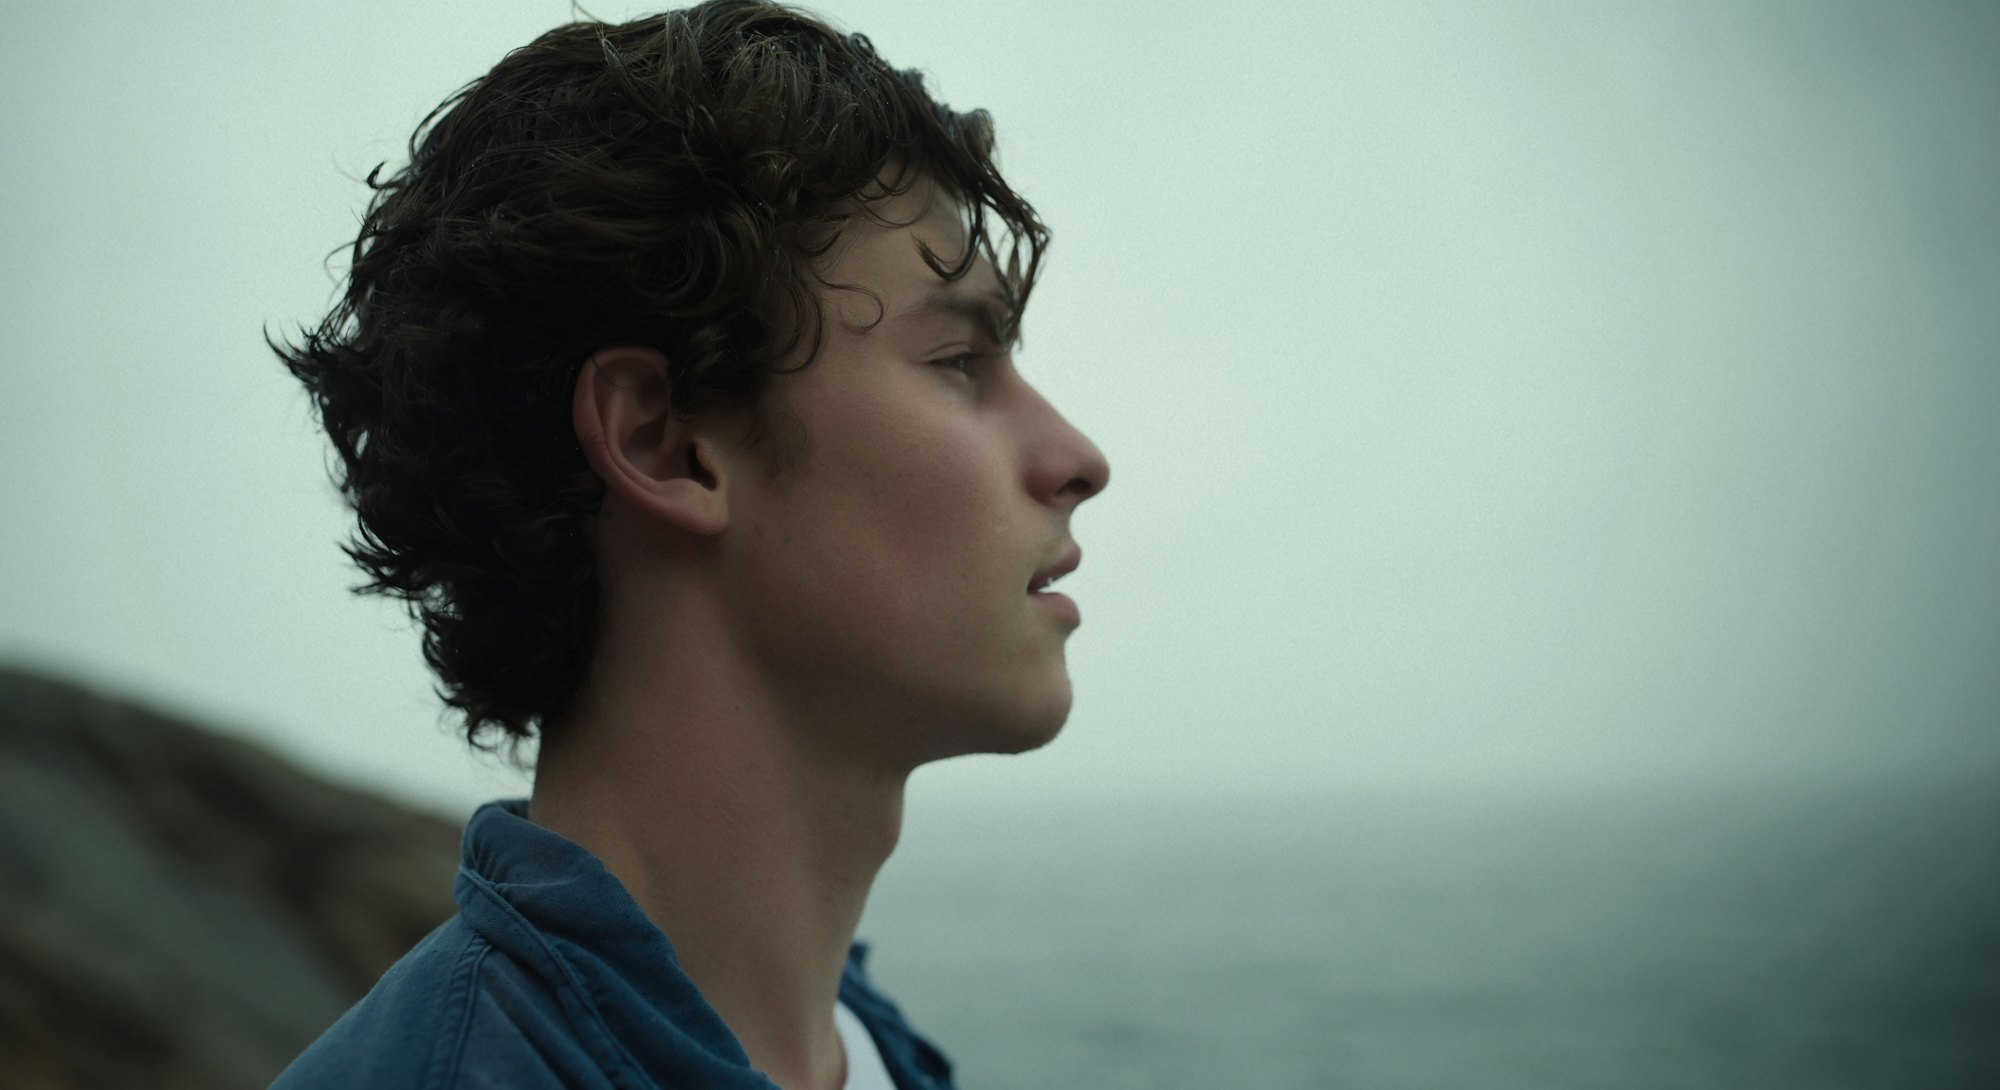 Singer Shawn Mendes in 'Shawn Mendes: In Wonder' via the Netflix press site.